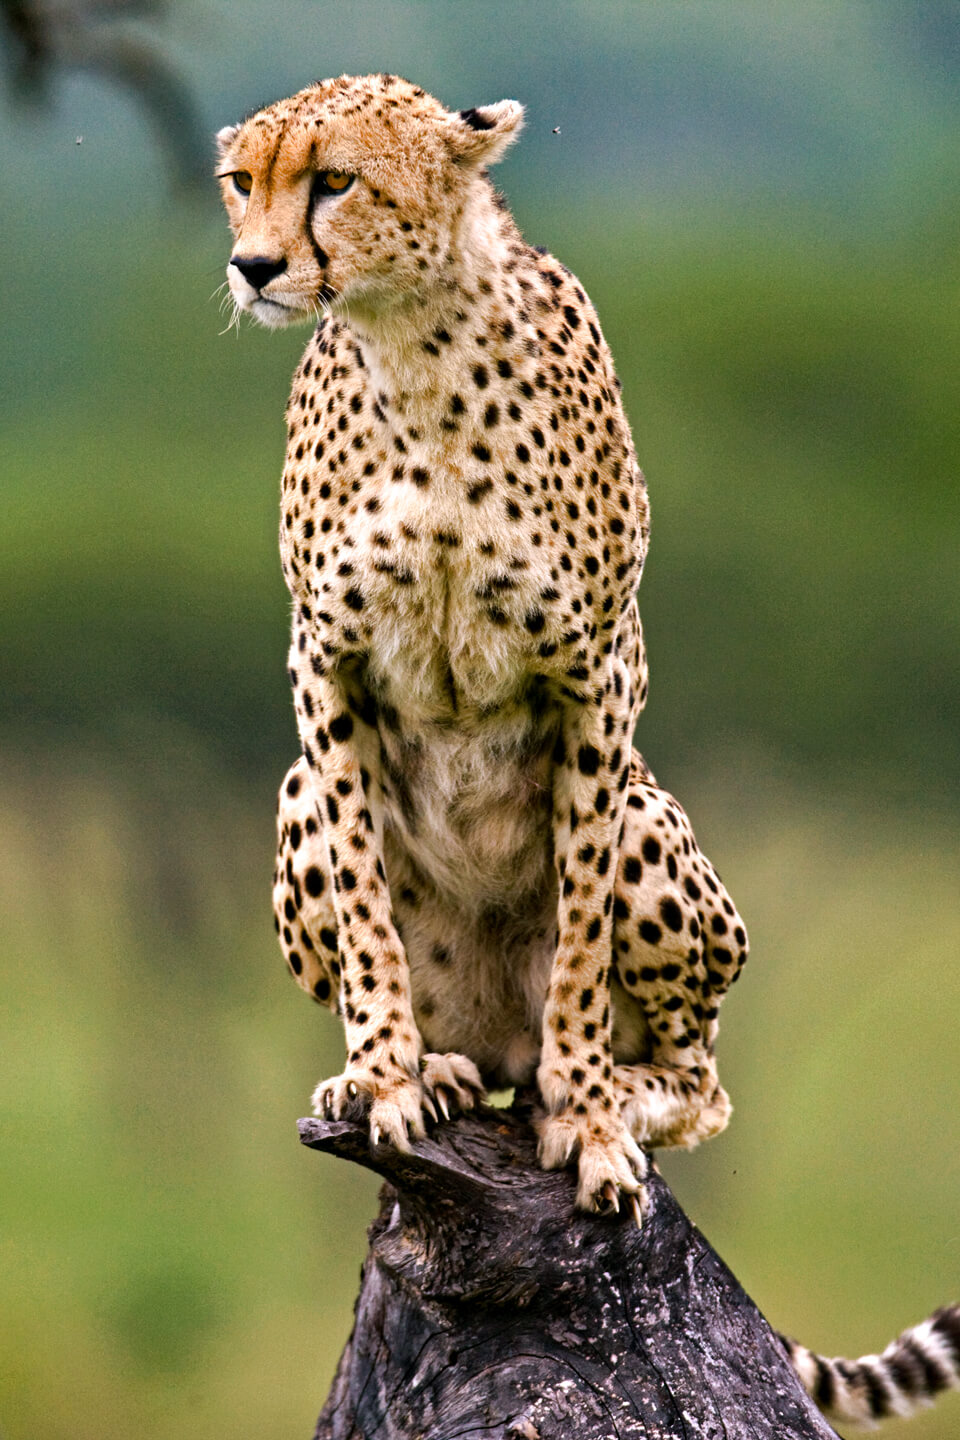 Cheetah can be found in Kidepo Valley National Park in Uganda